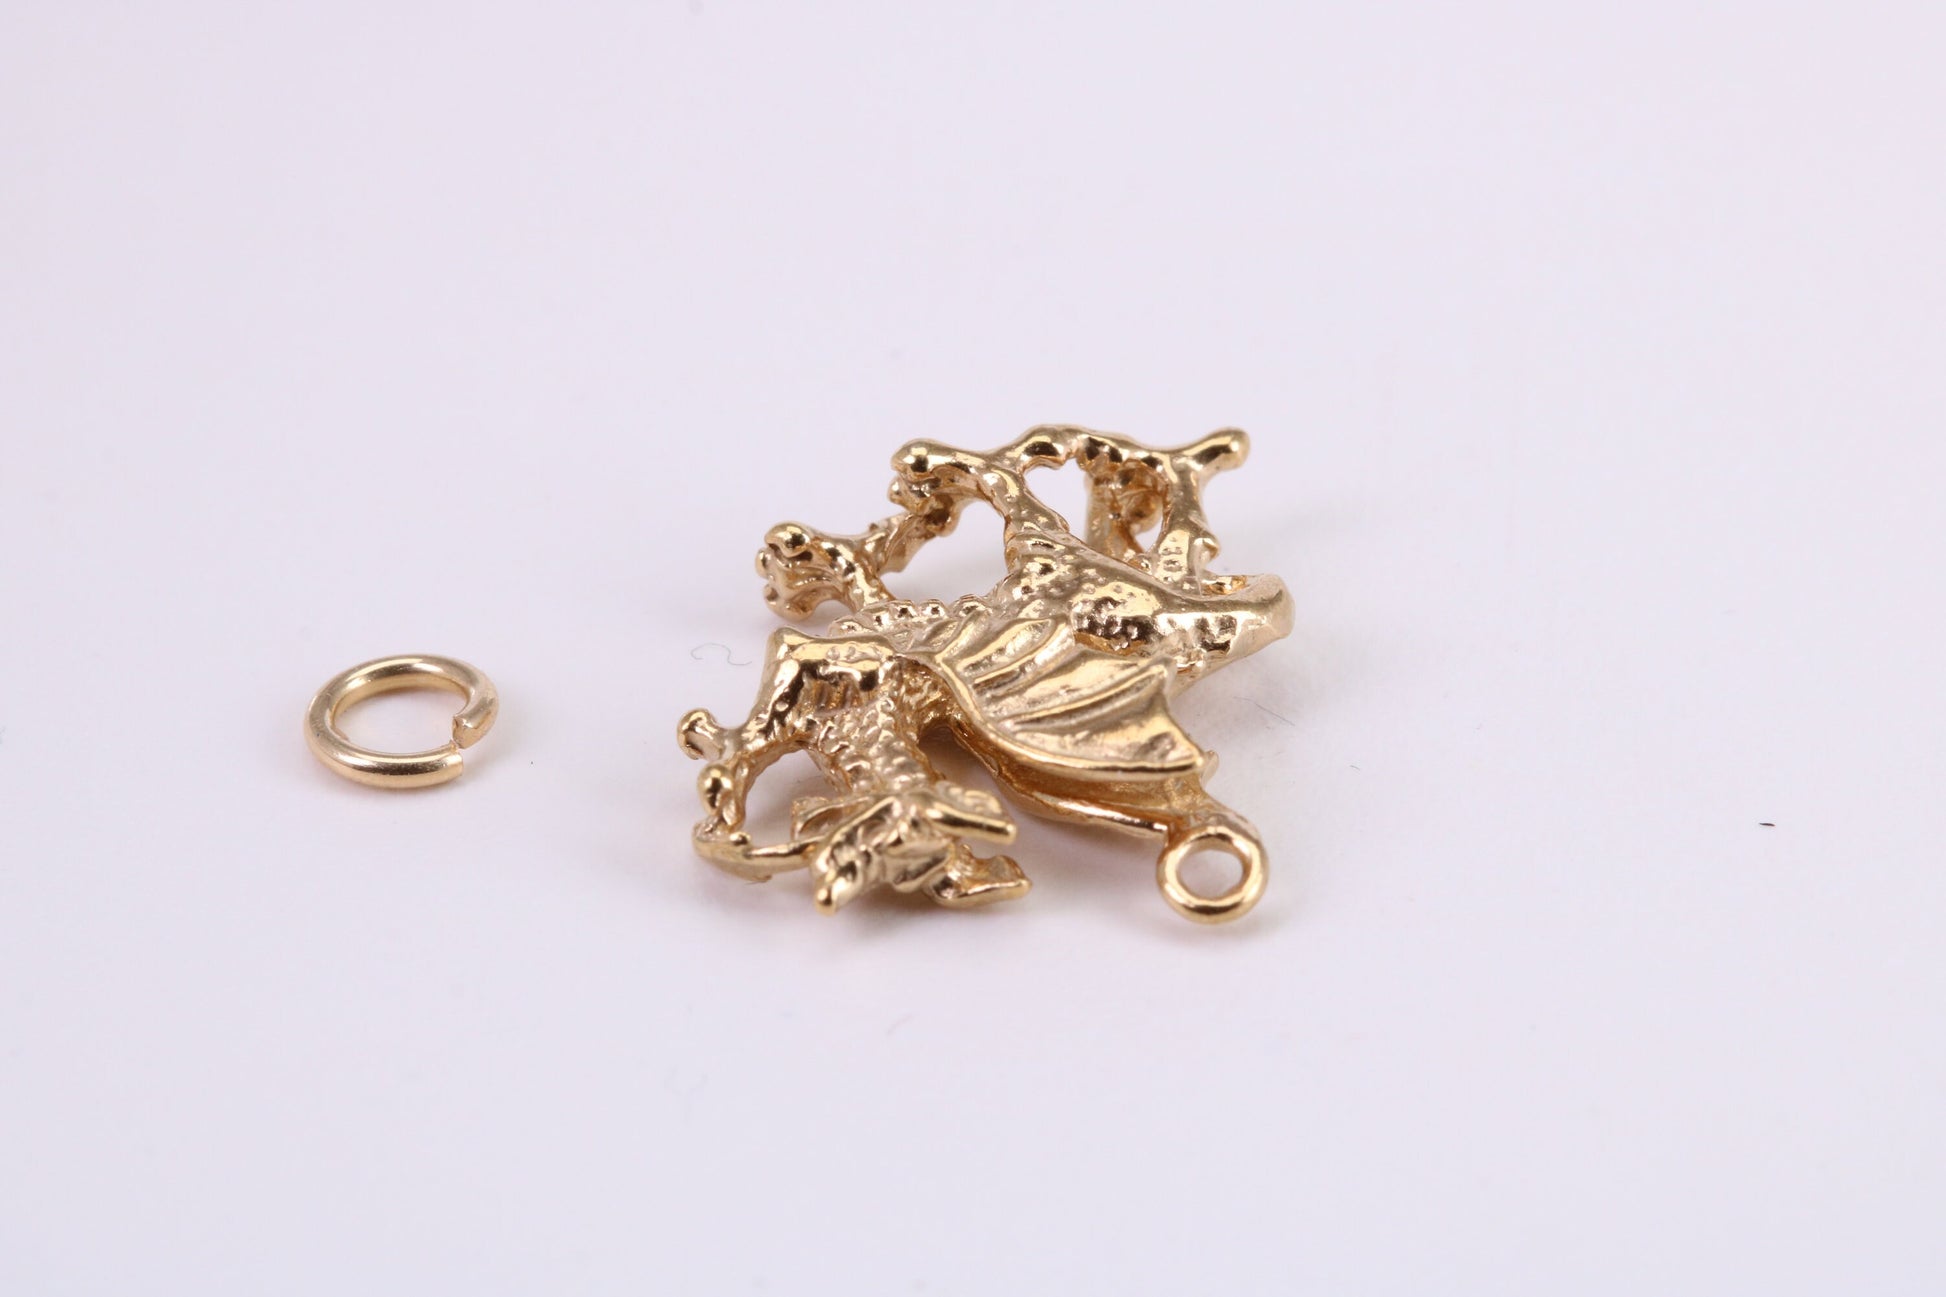 Welsh Dragon Charm, Traditional Charm, Made from Solid Yellow Gold, British Hallmarked, Complete with Attachment Link